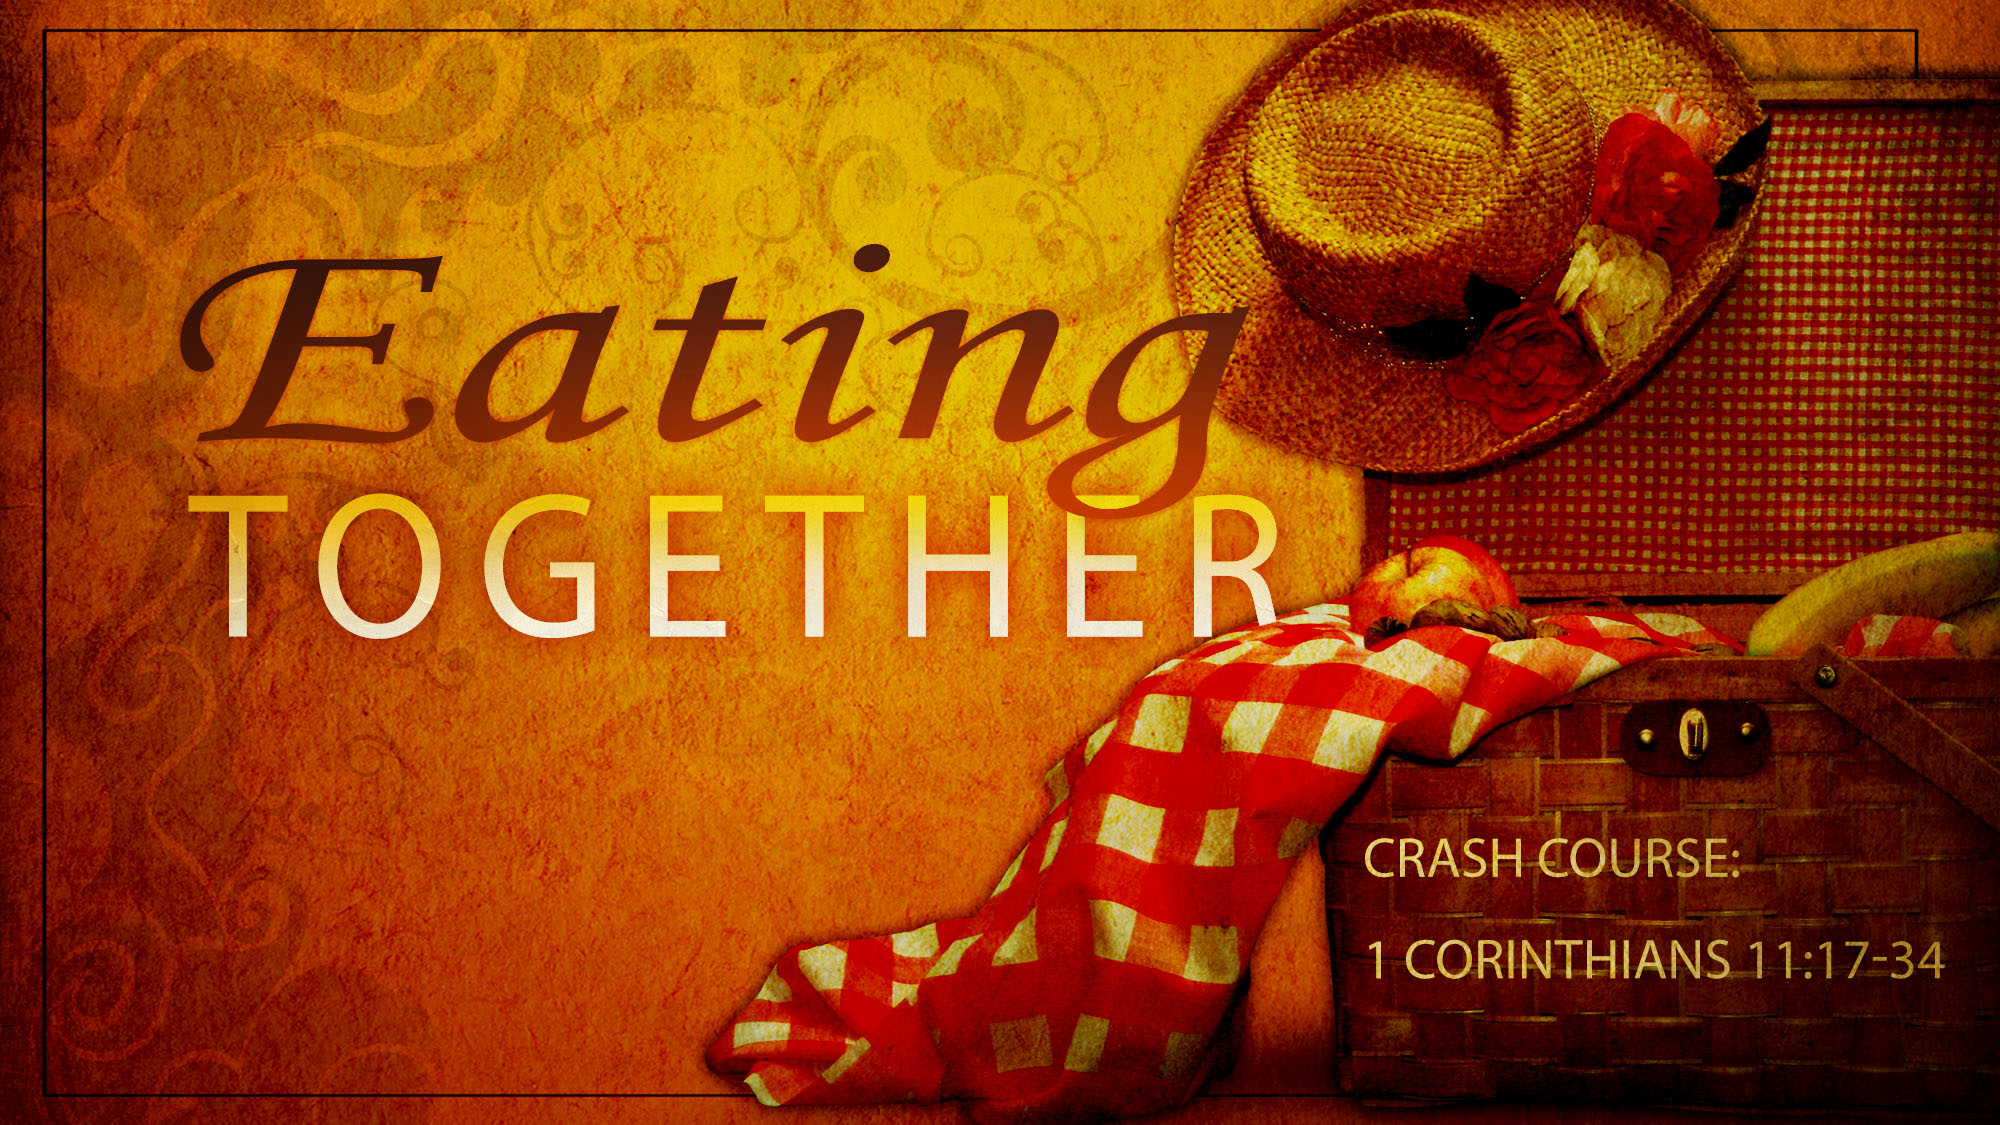 Eating Together: Crash Course in 1 Corinthians 11:17-34